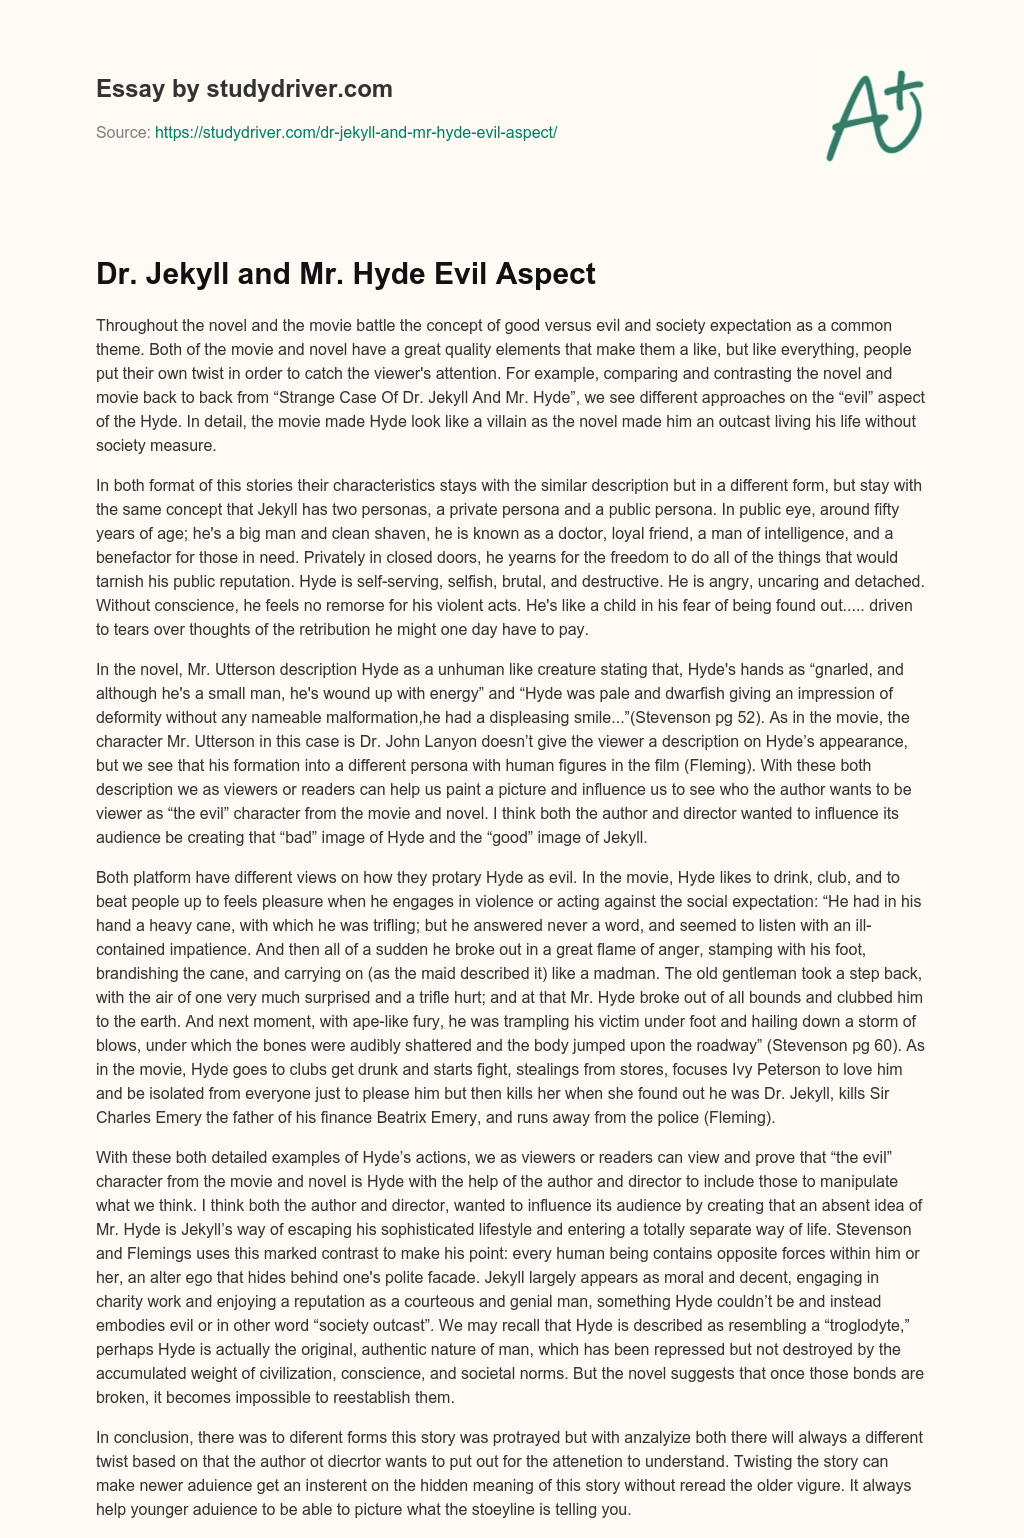 Dr. Jekyll and Mr. Hyde Evil Aspect essay